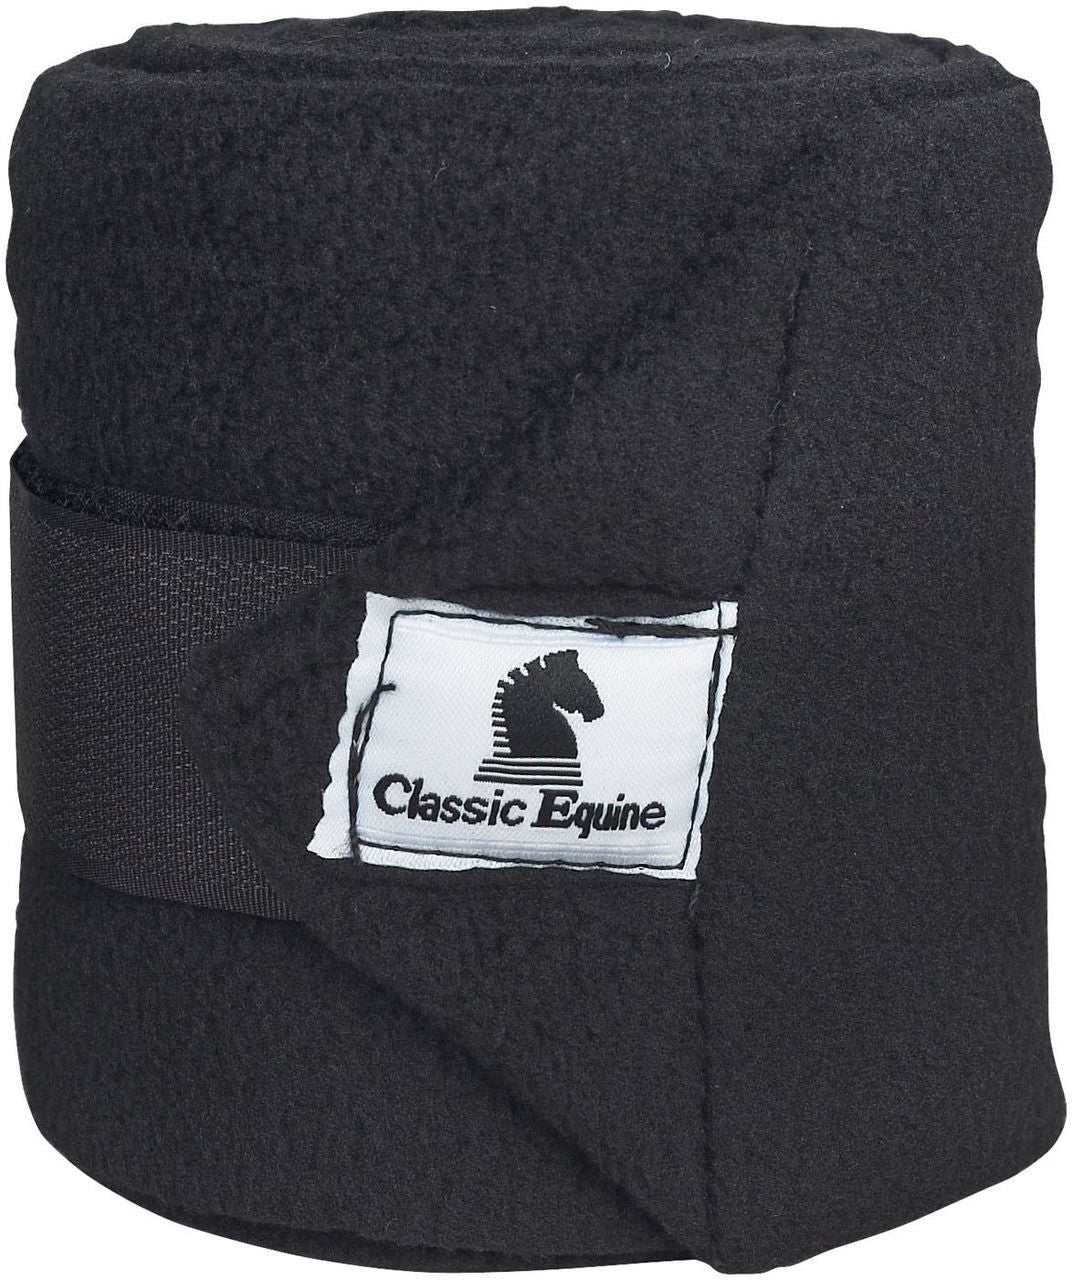 Classic Equine Polo Wrap With Wash Bag.